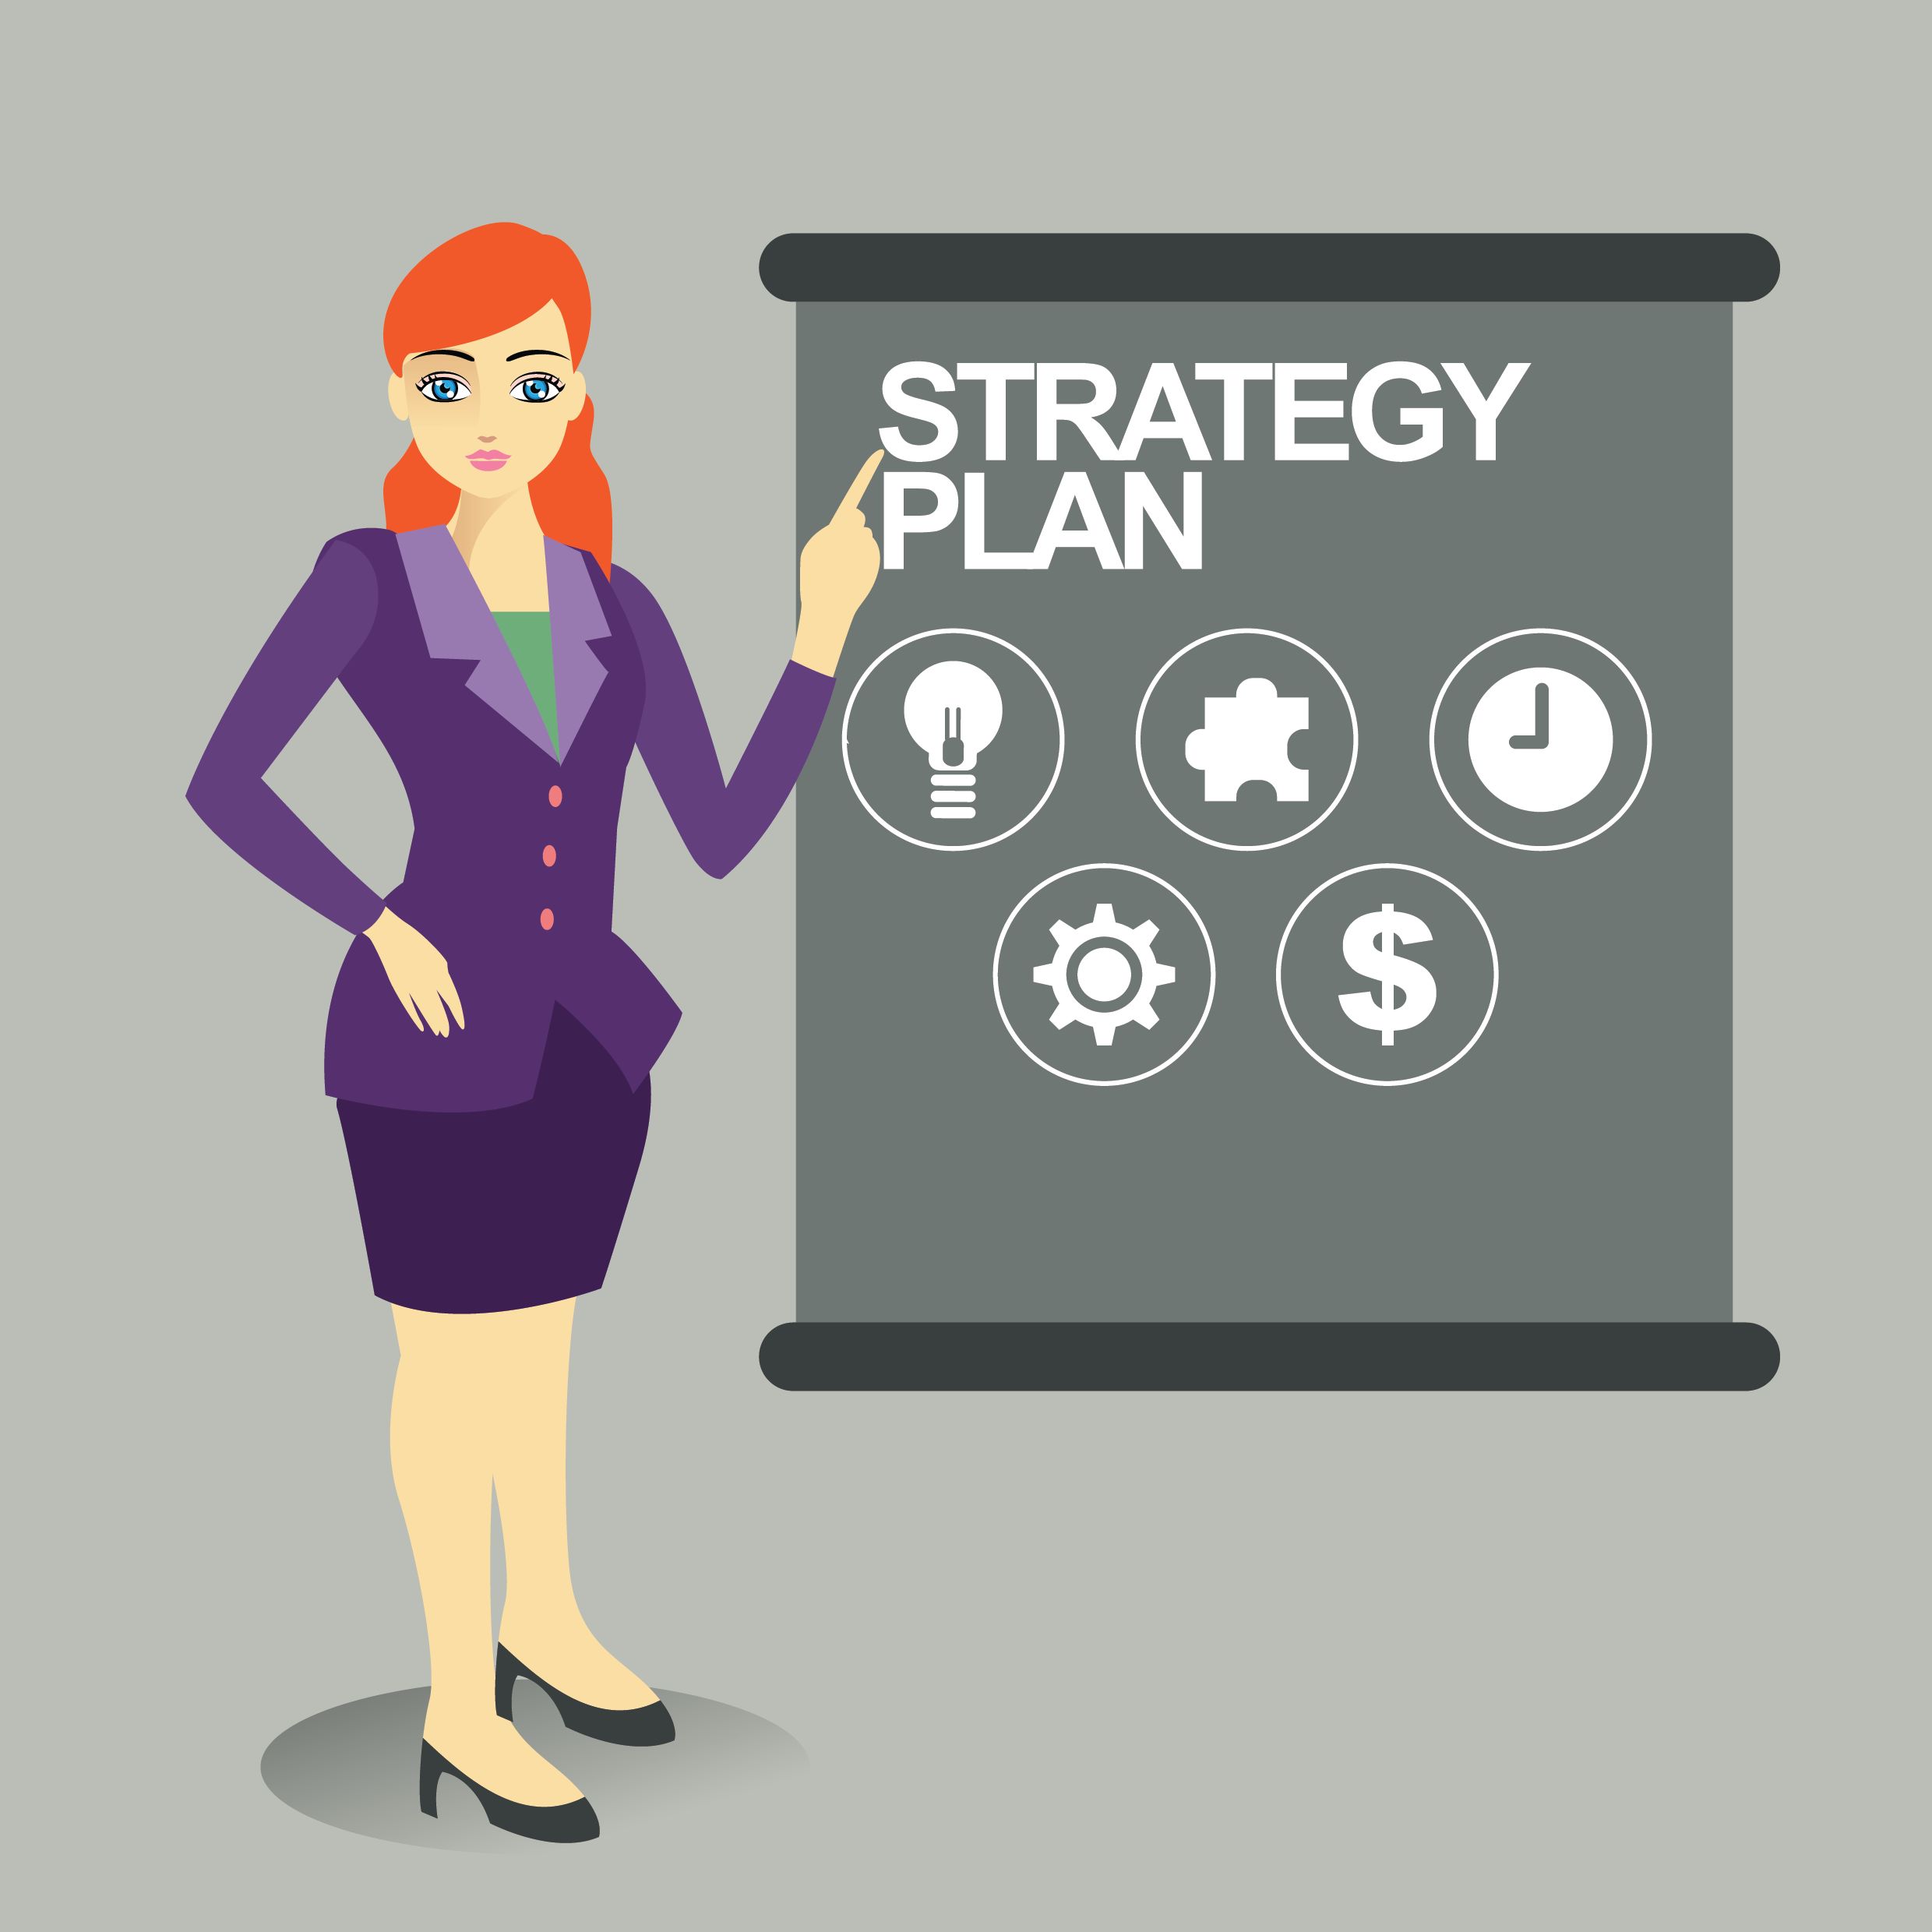 Effective Marketing Strategies and Tactics For Small Business